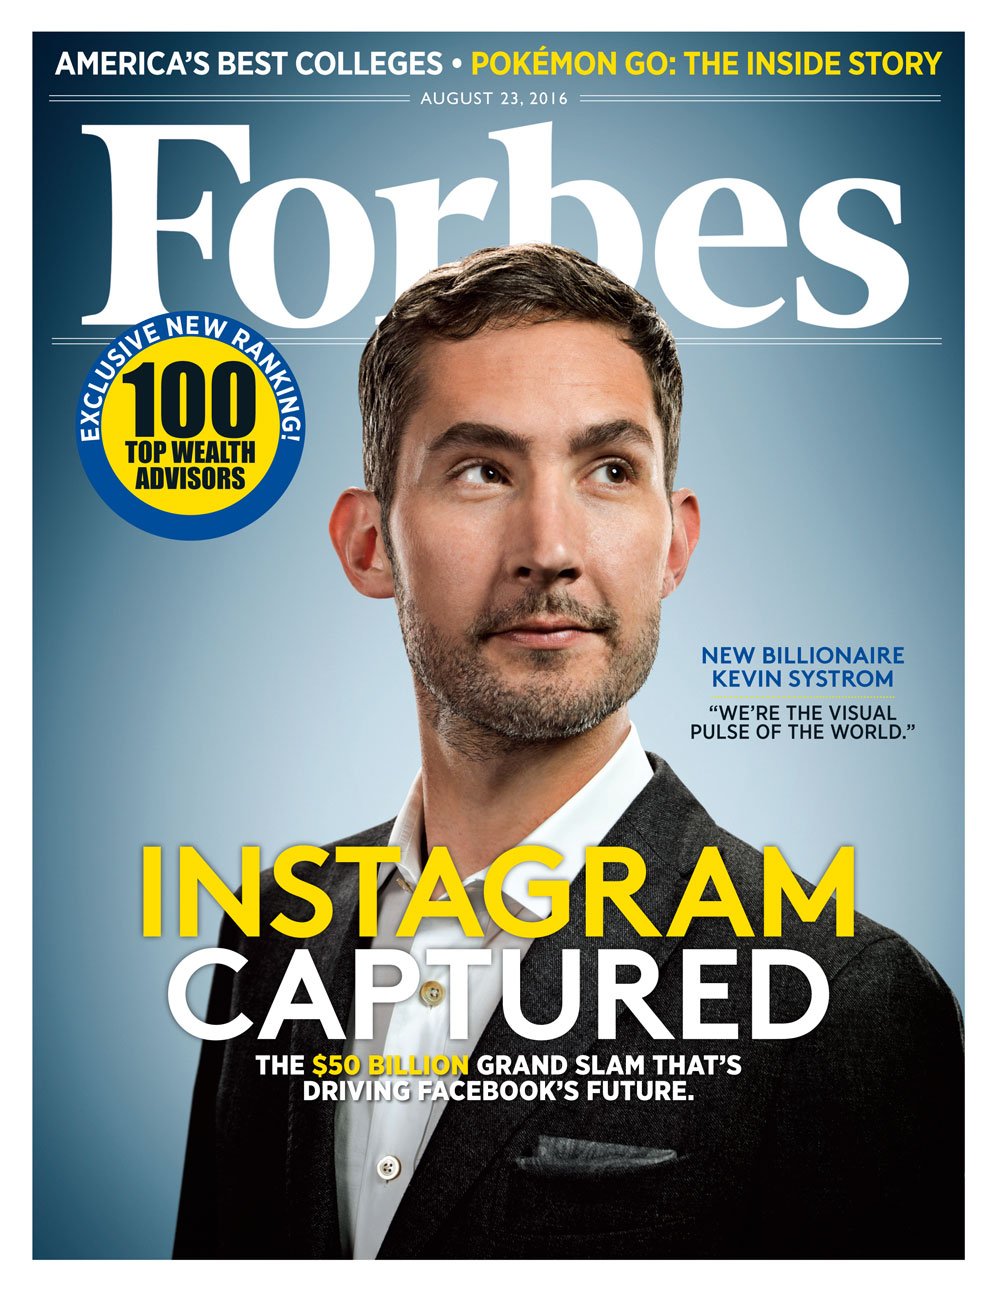 Silicon Valley Today: Instagram